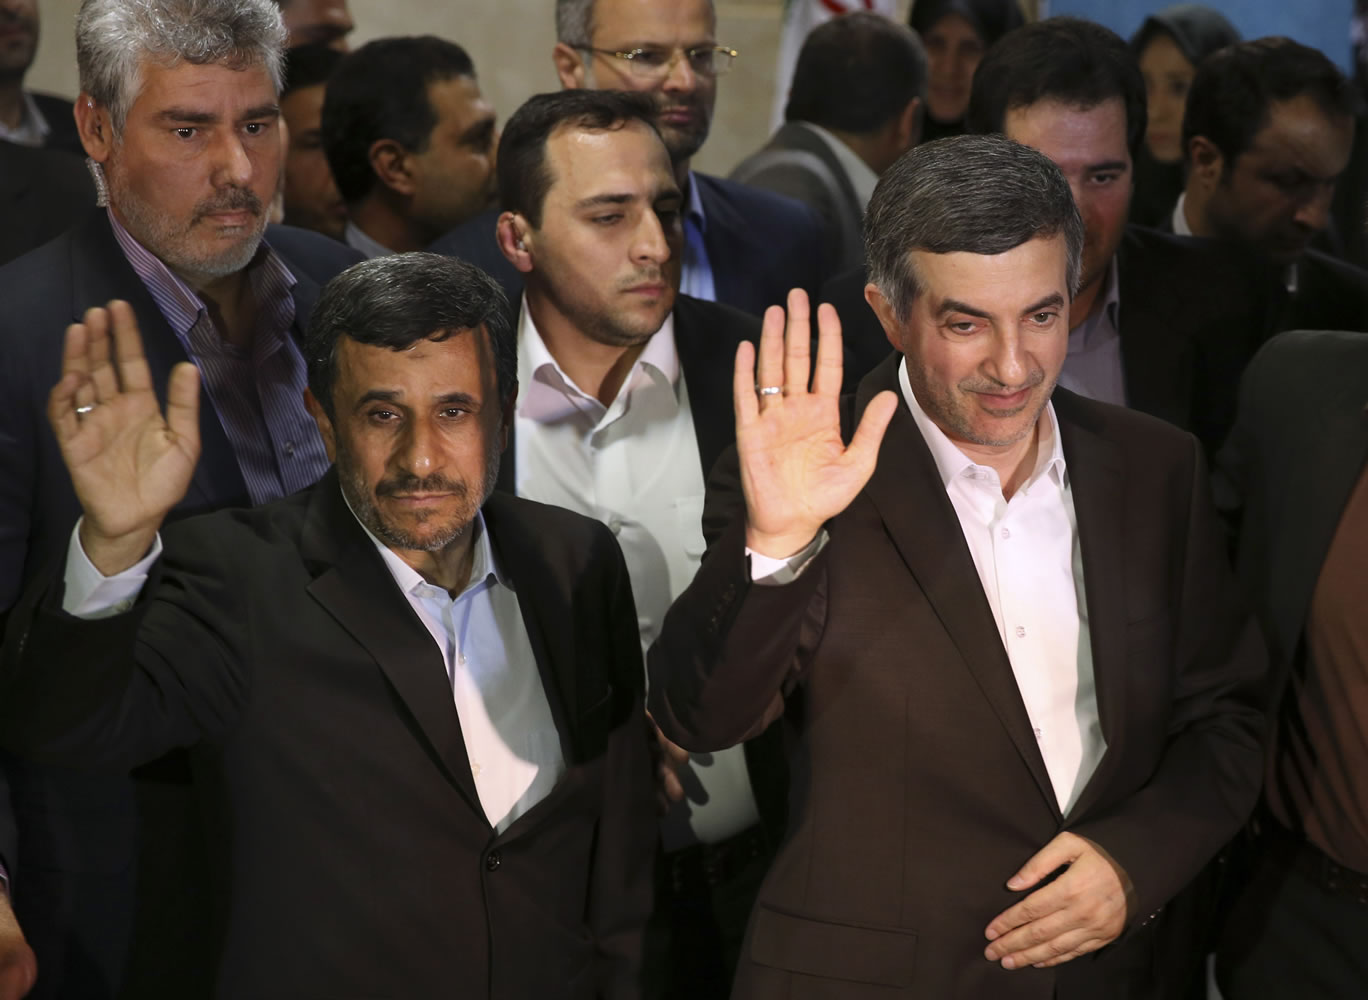 Iranian President Mahmoud Ahmadinejad, left, and his close ally Esfandiar Rahim Mashaei wave to journalists as they arrive at the election headquarters of the interior ministry for registering Masheaei's candidacy for the upcoming presidential election, in Tehran, Iran.